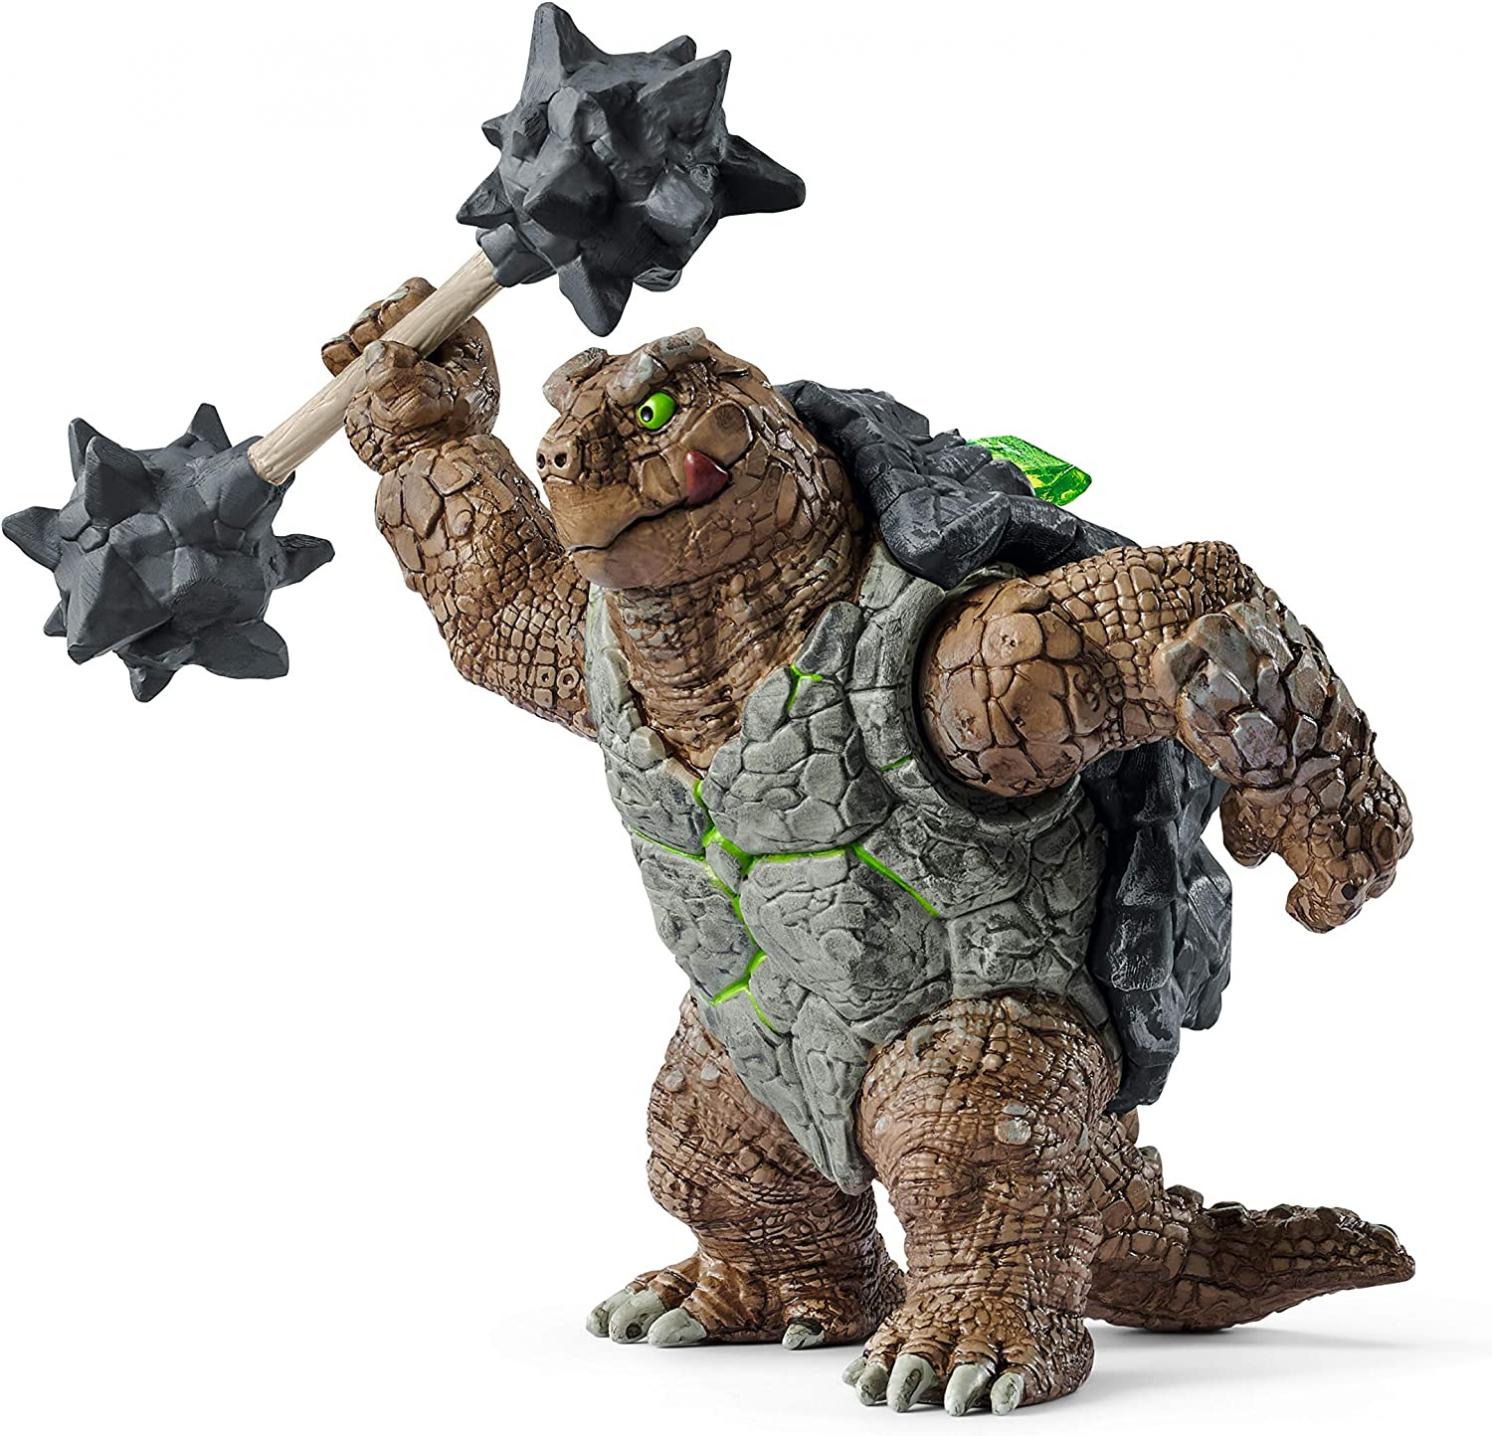 Schleich Eldrador, Eldrador Creatures, Action Figures for Boys and Girls 7-12 years old, Armored Turtle with Weapon